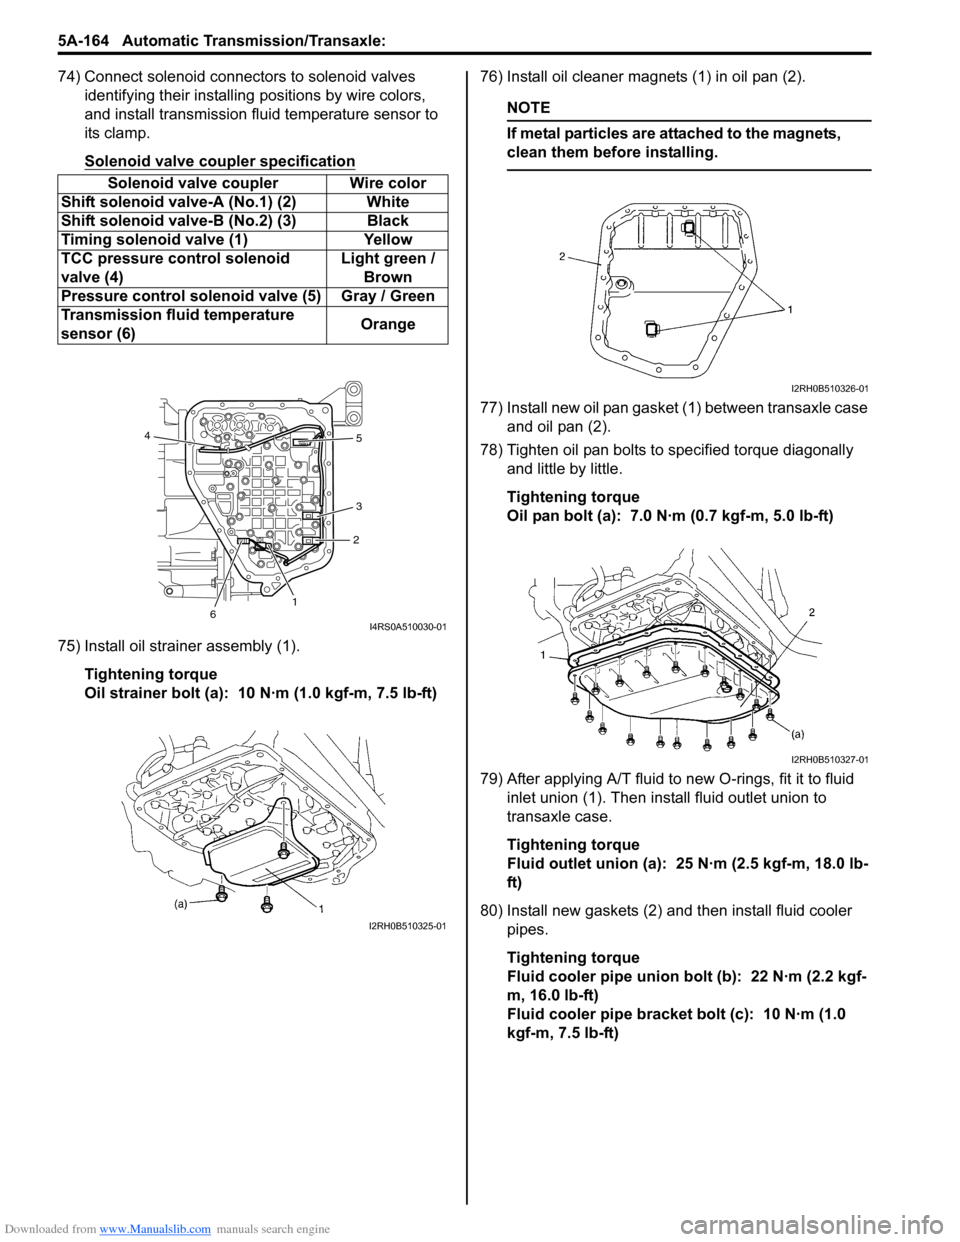 SUZUKI SWIFT 2007 2.G Service Workshop Manual Downloaded from www.Manualslib.com manuals search engine 5A-164 Automatic Transmission/Transaxle: 
74) Connect solenoid connectors to solenoid valves identifying their installing  positions by wire co